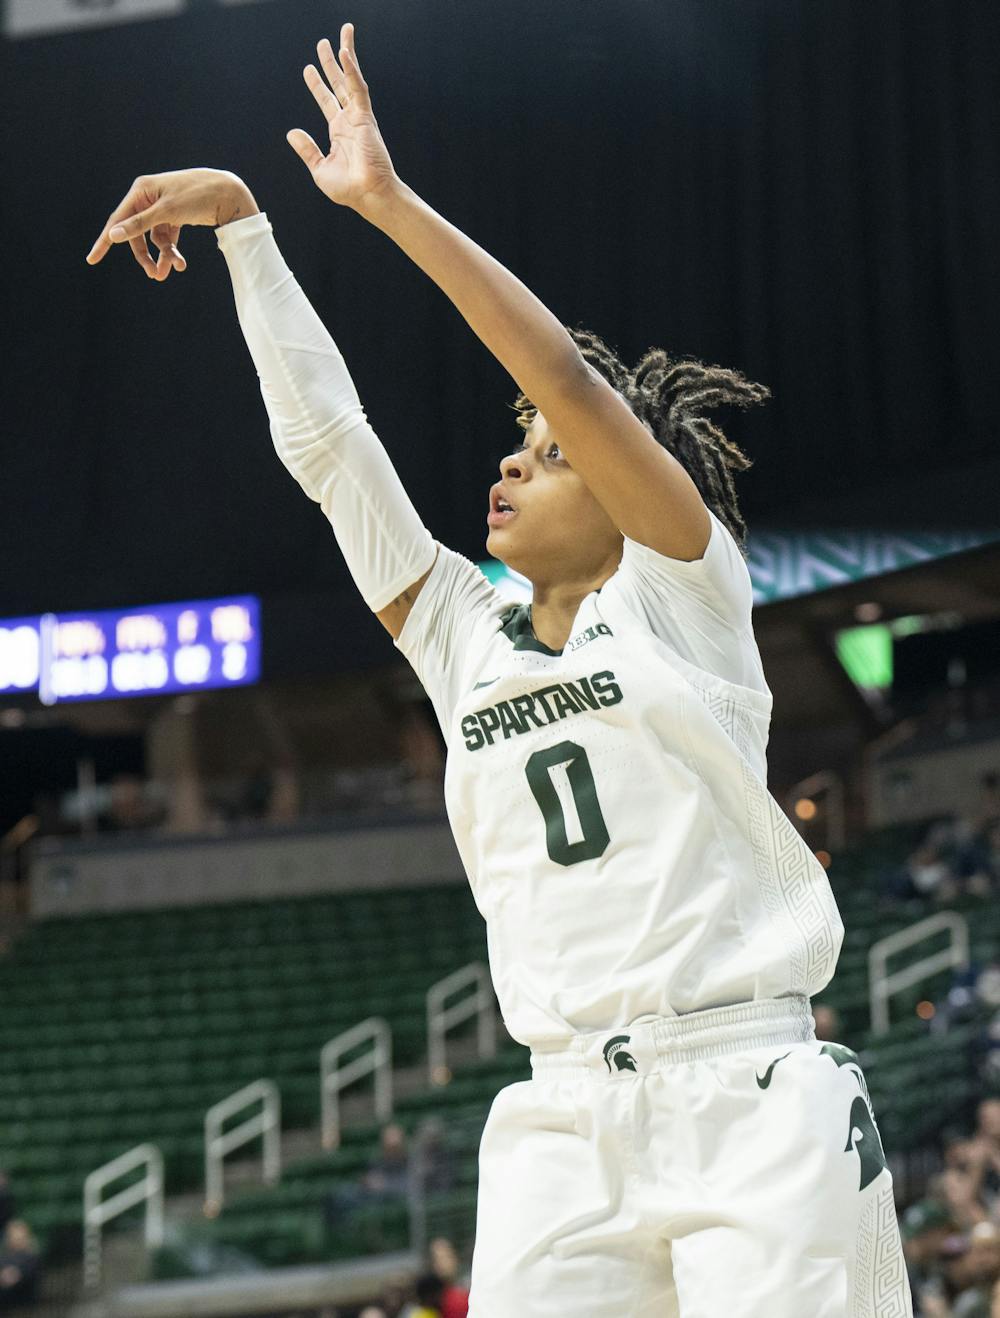 Sophomore guard DeeDee Hagemann, 0, attempts a shot during Michigan State’s game against Prairie View A&M on Tuesday, Dec. 20, 2022 at the Breslin Center. The Spartans ultimately beat the Panthers, 98-50.